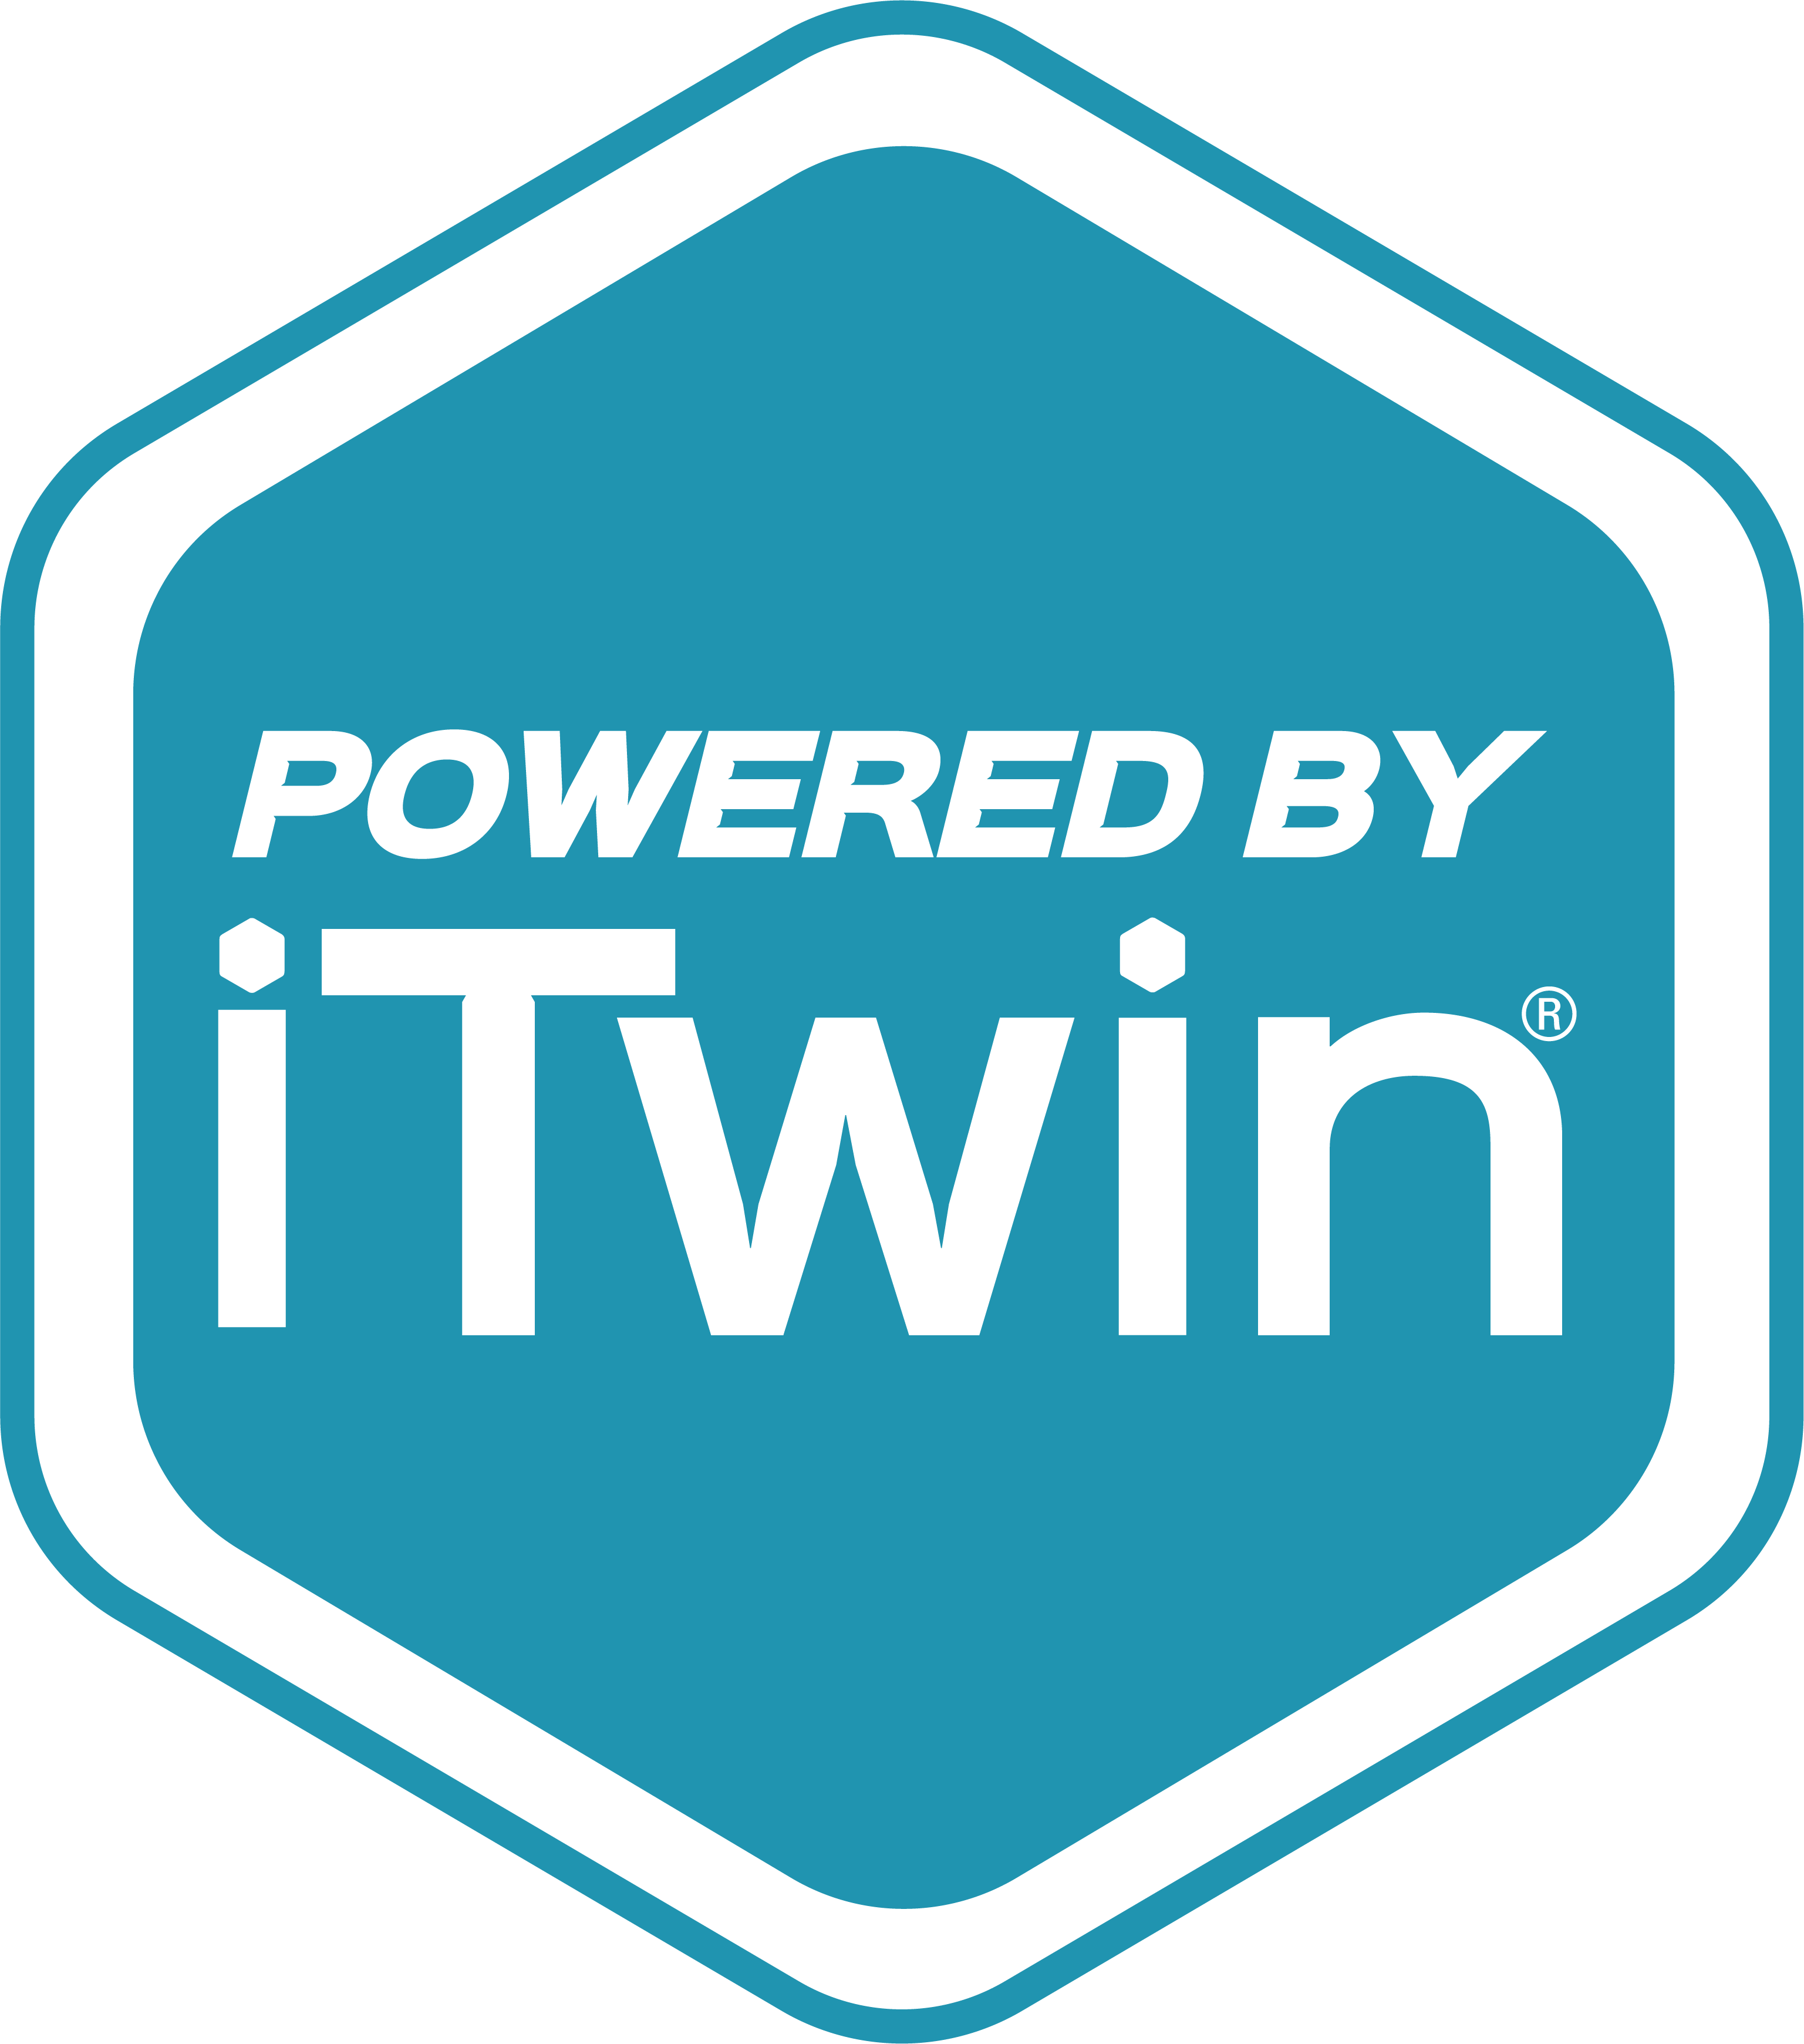 Powered by iTwin